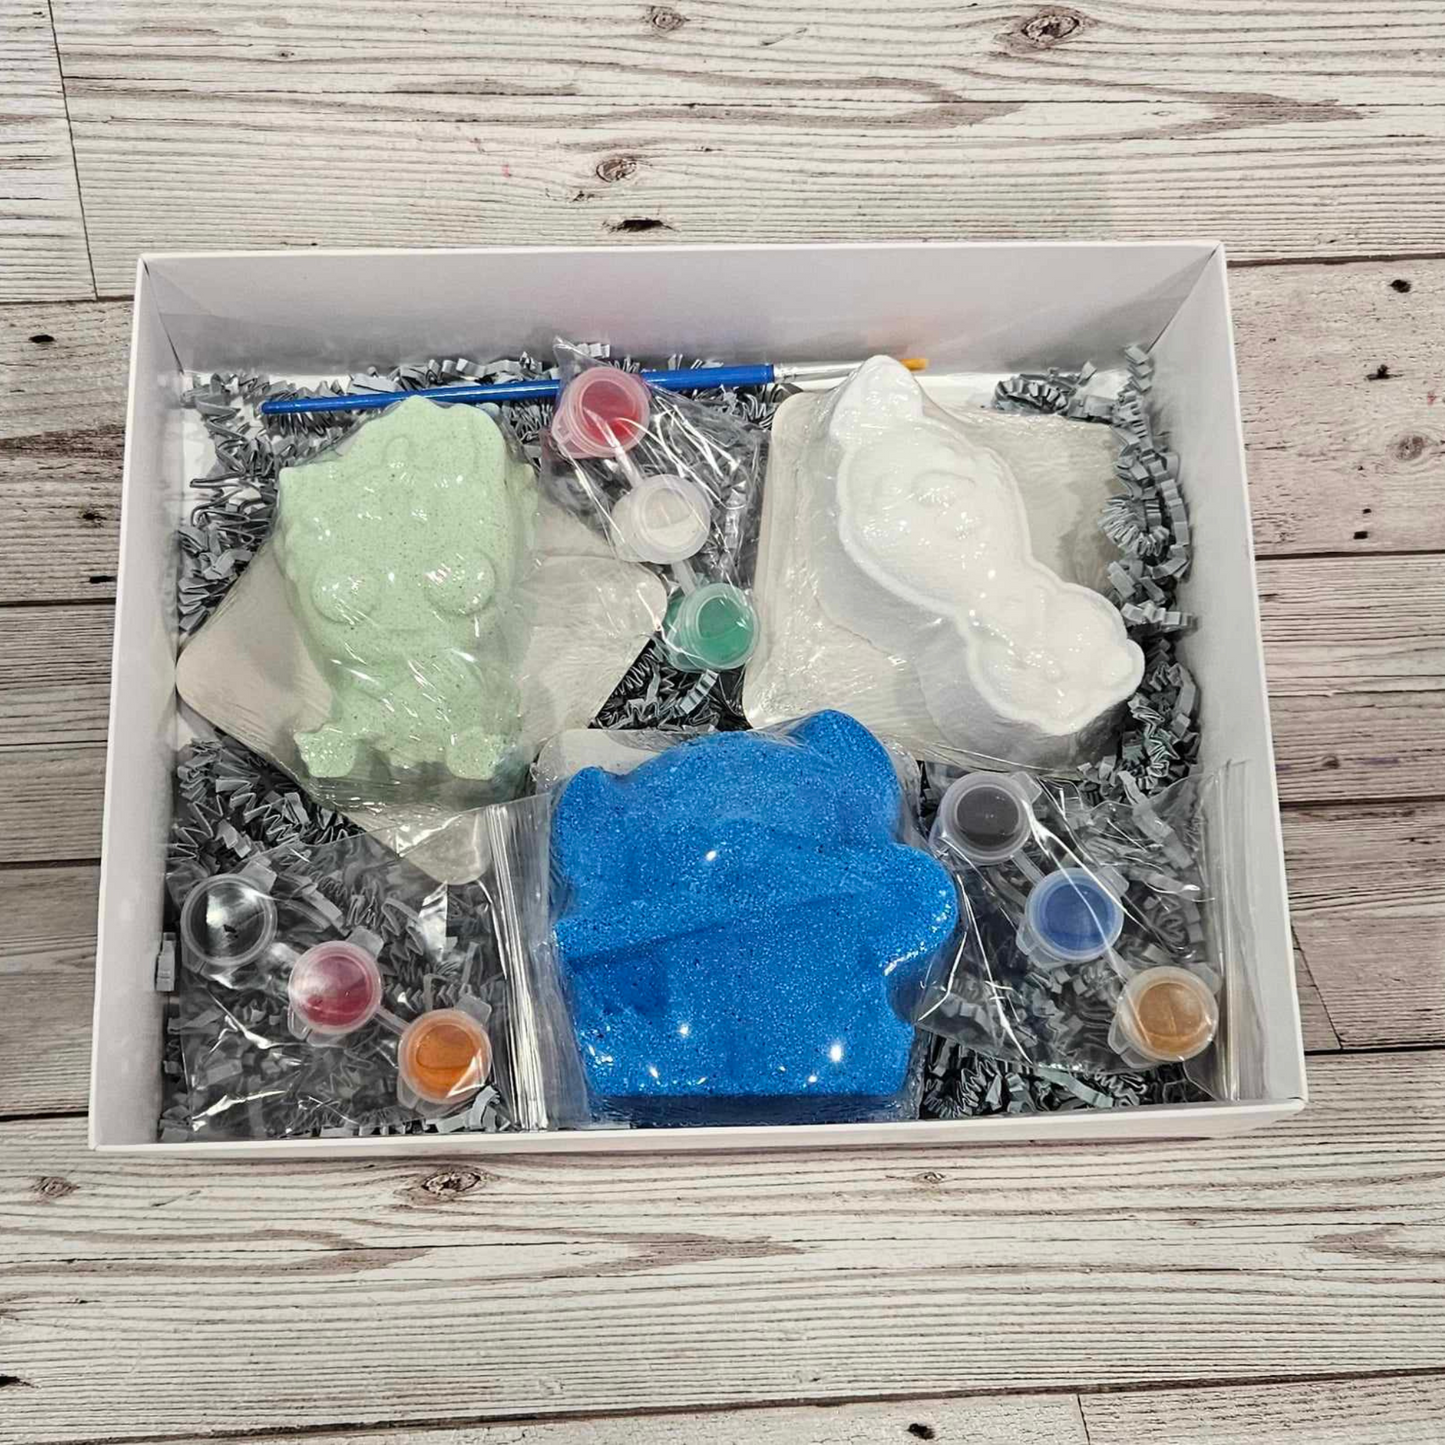 'Set of 3 Christmas Characters' Paint your own Bath Bomb kit